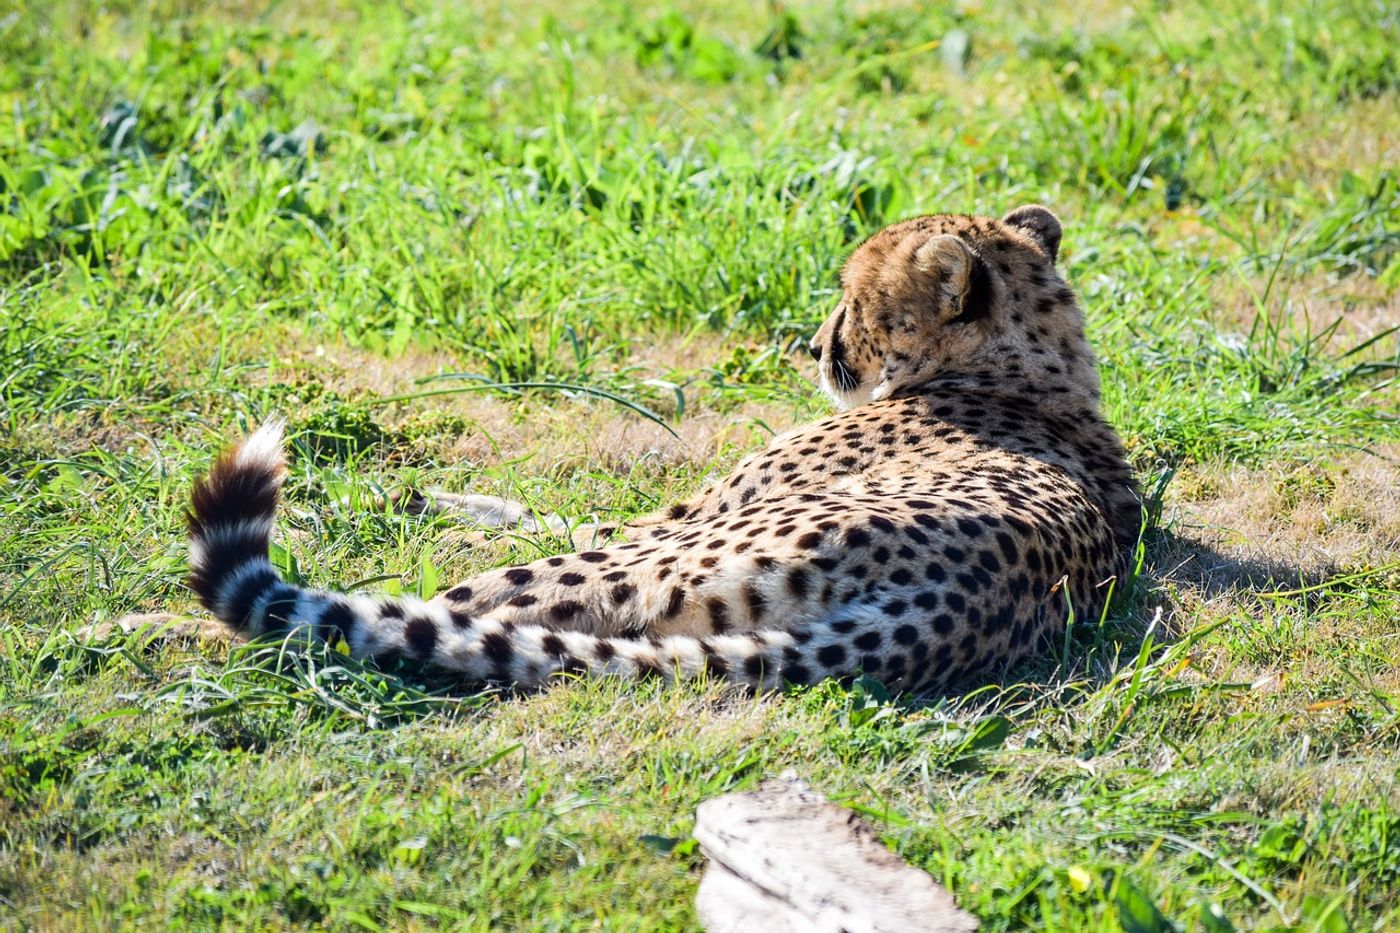 Cheetahs may eat their prey differently depending on their surroundings.